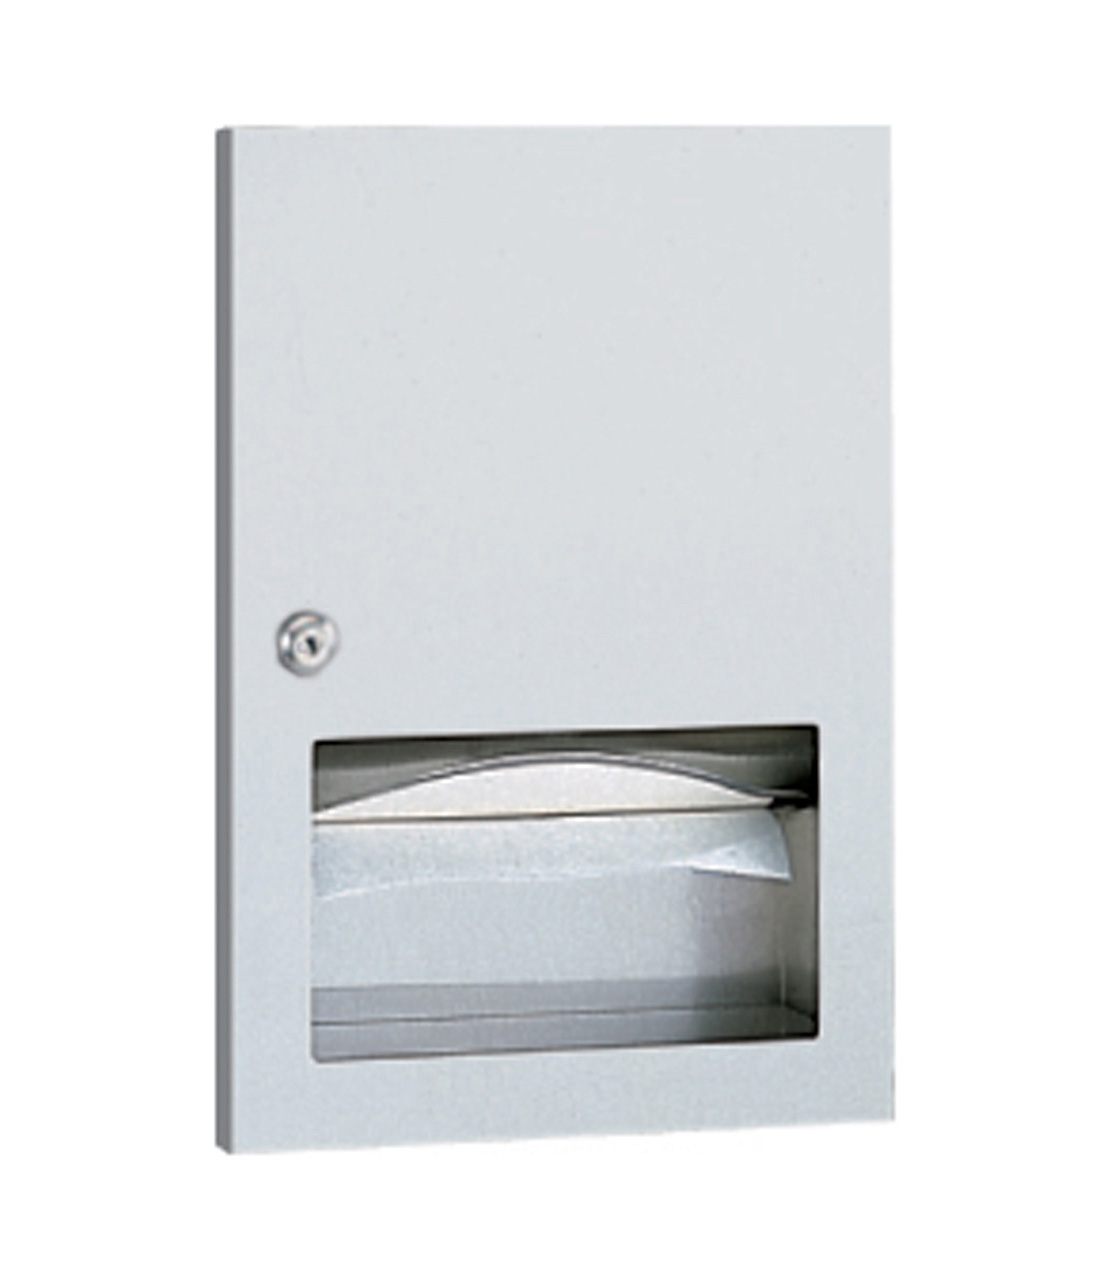 Coverall Recessed Towel Dispenser - (Model #: td-6f)-image